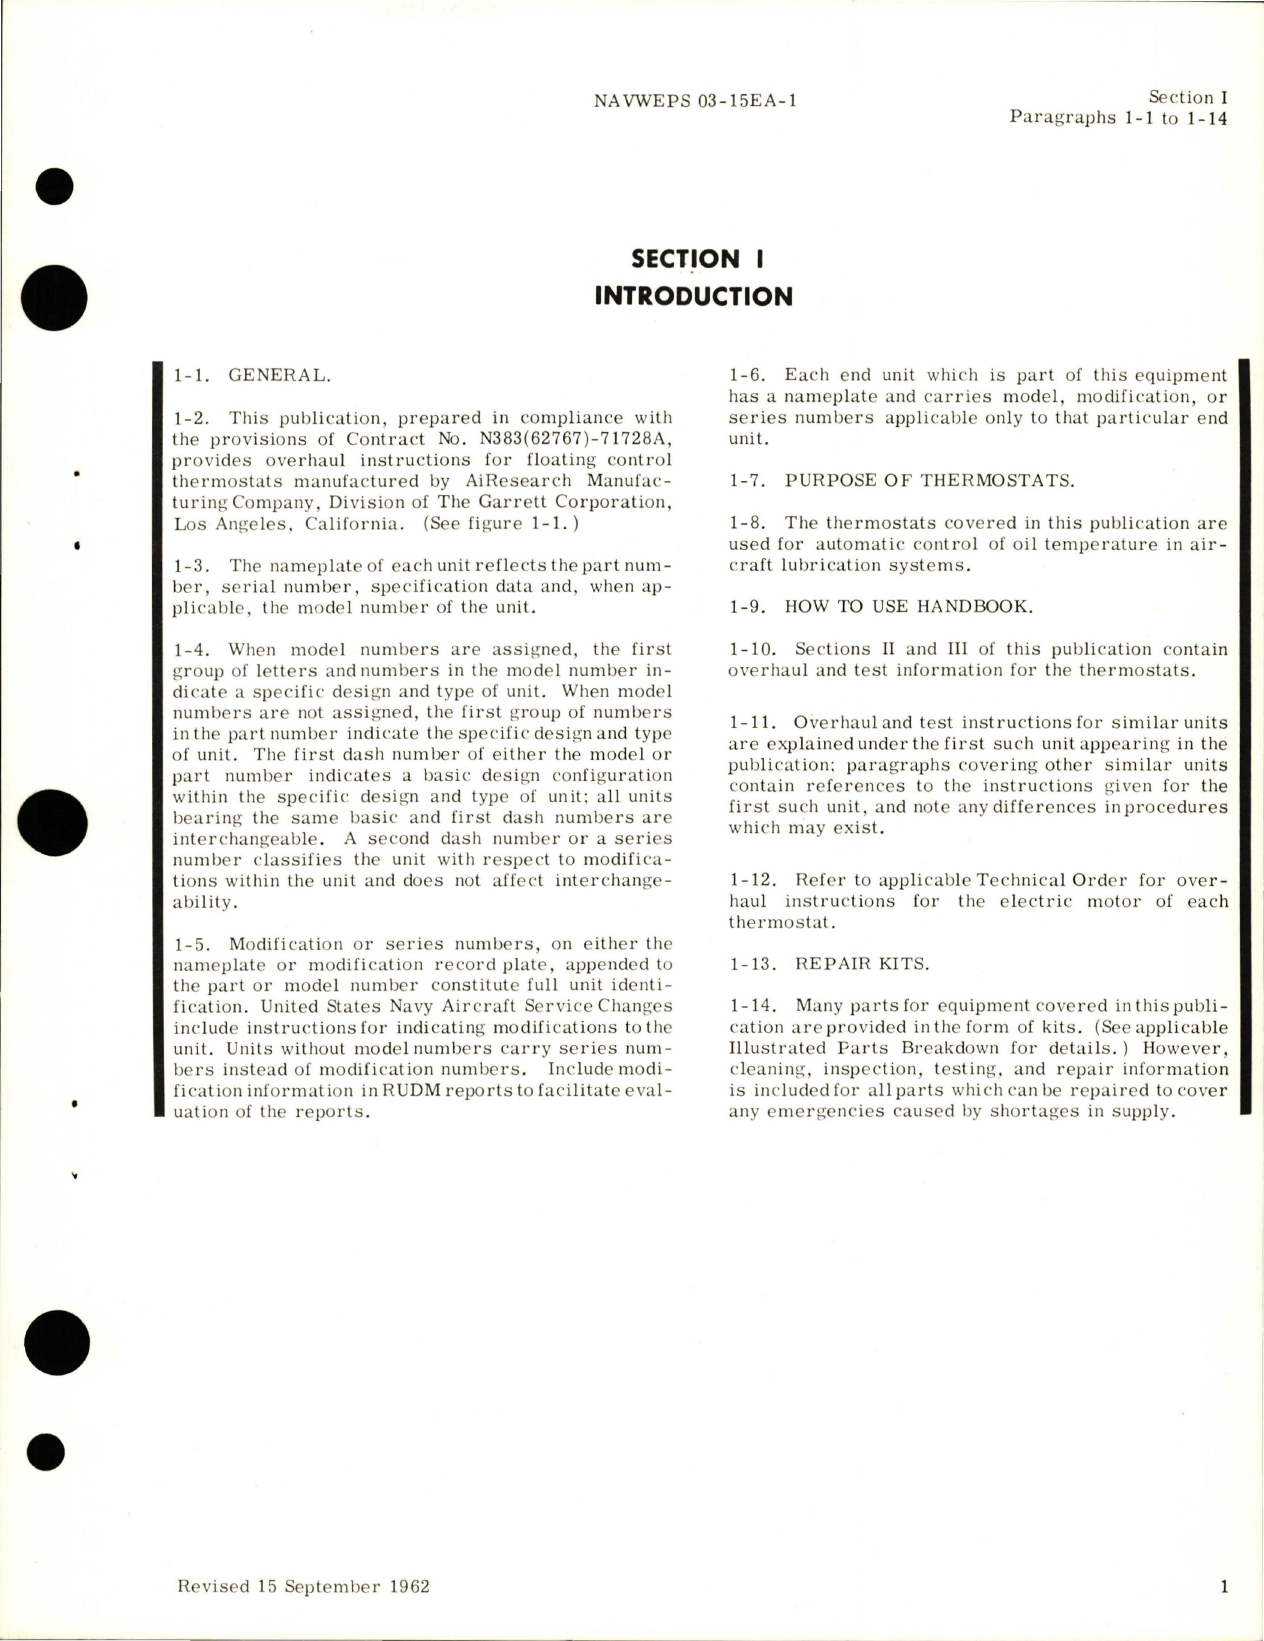 Sample page 5 from AirCorps Library document: Overhaul Instructions for Floating Control Thermostats